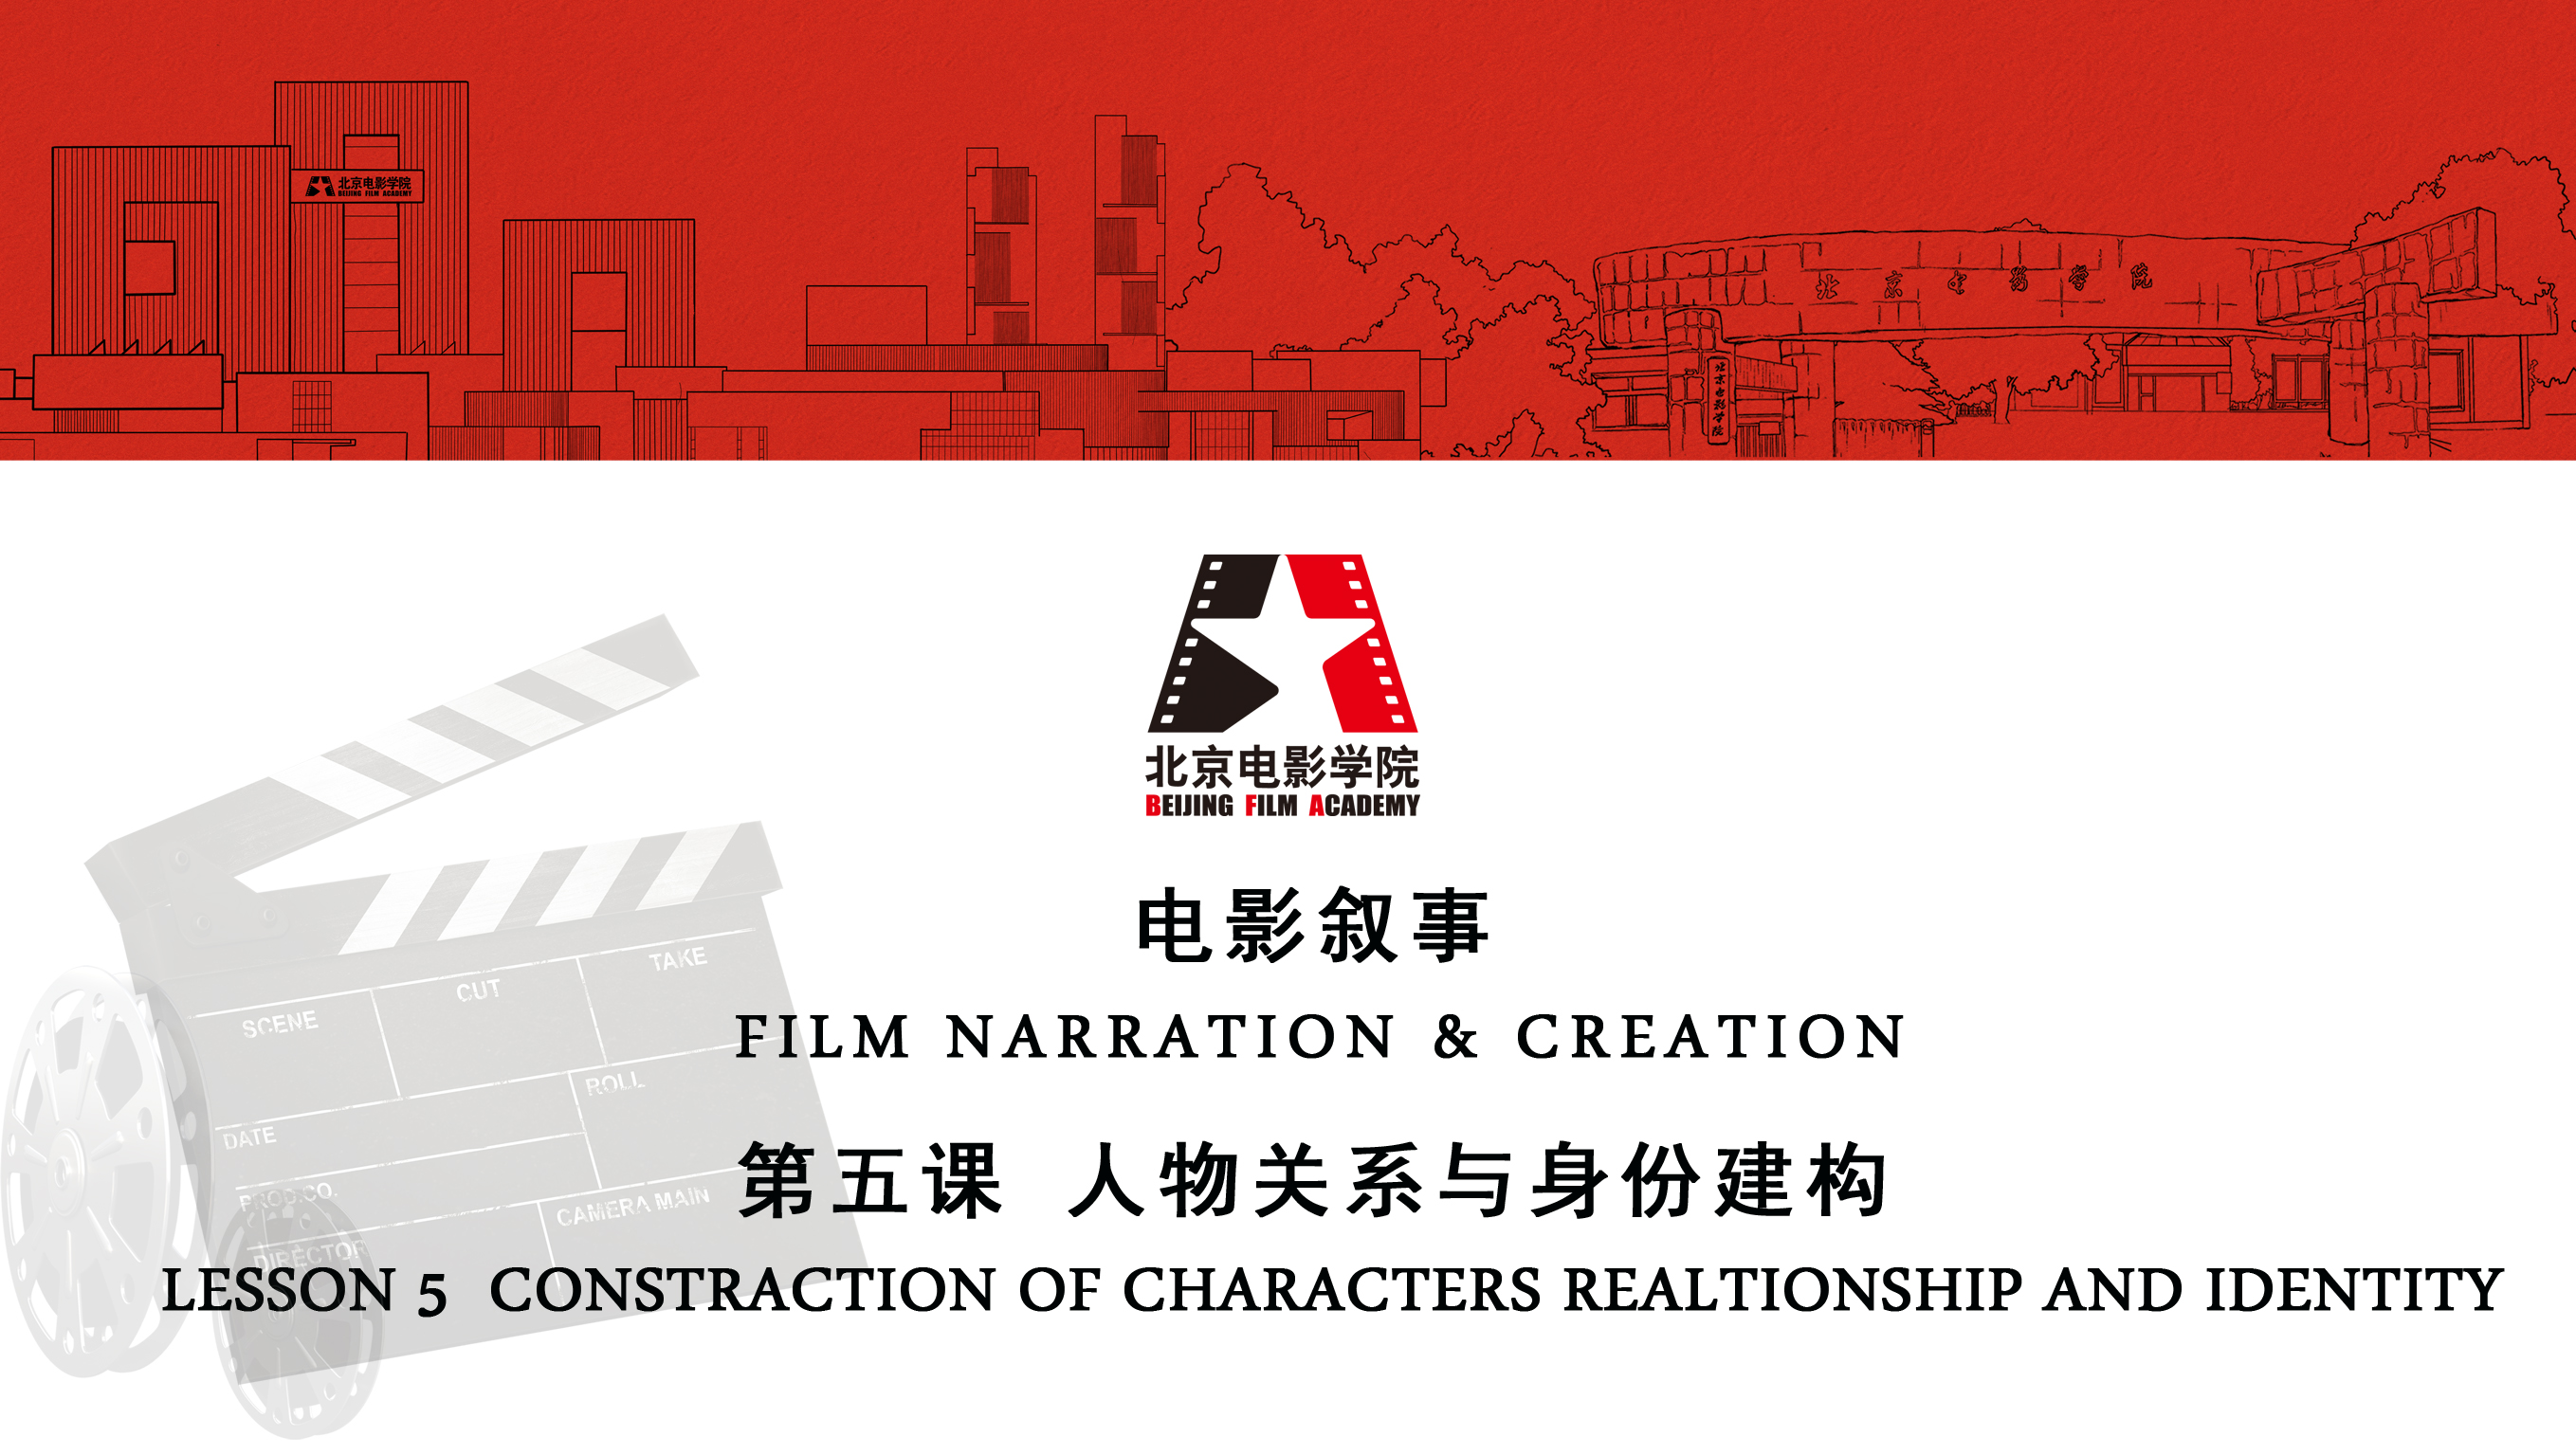 FILM NARRATION & CREATION LESSON 5 CONSTRACTION OF CHARACTERS REALTIONSHIP AND IDENTITY